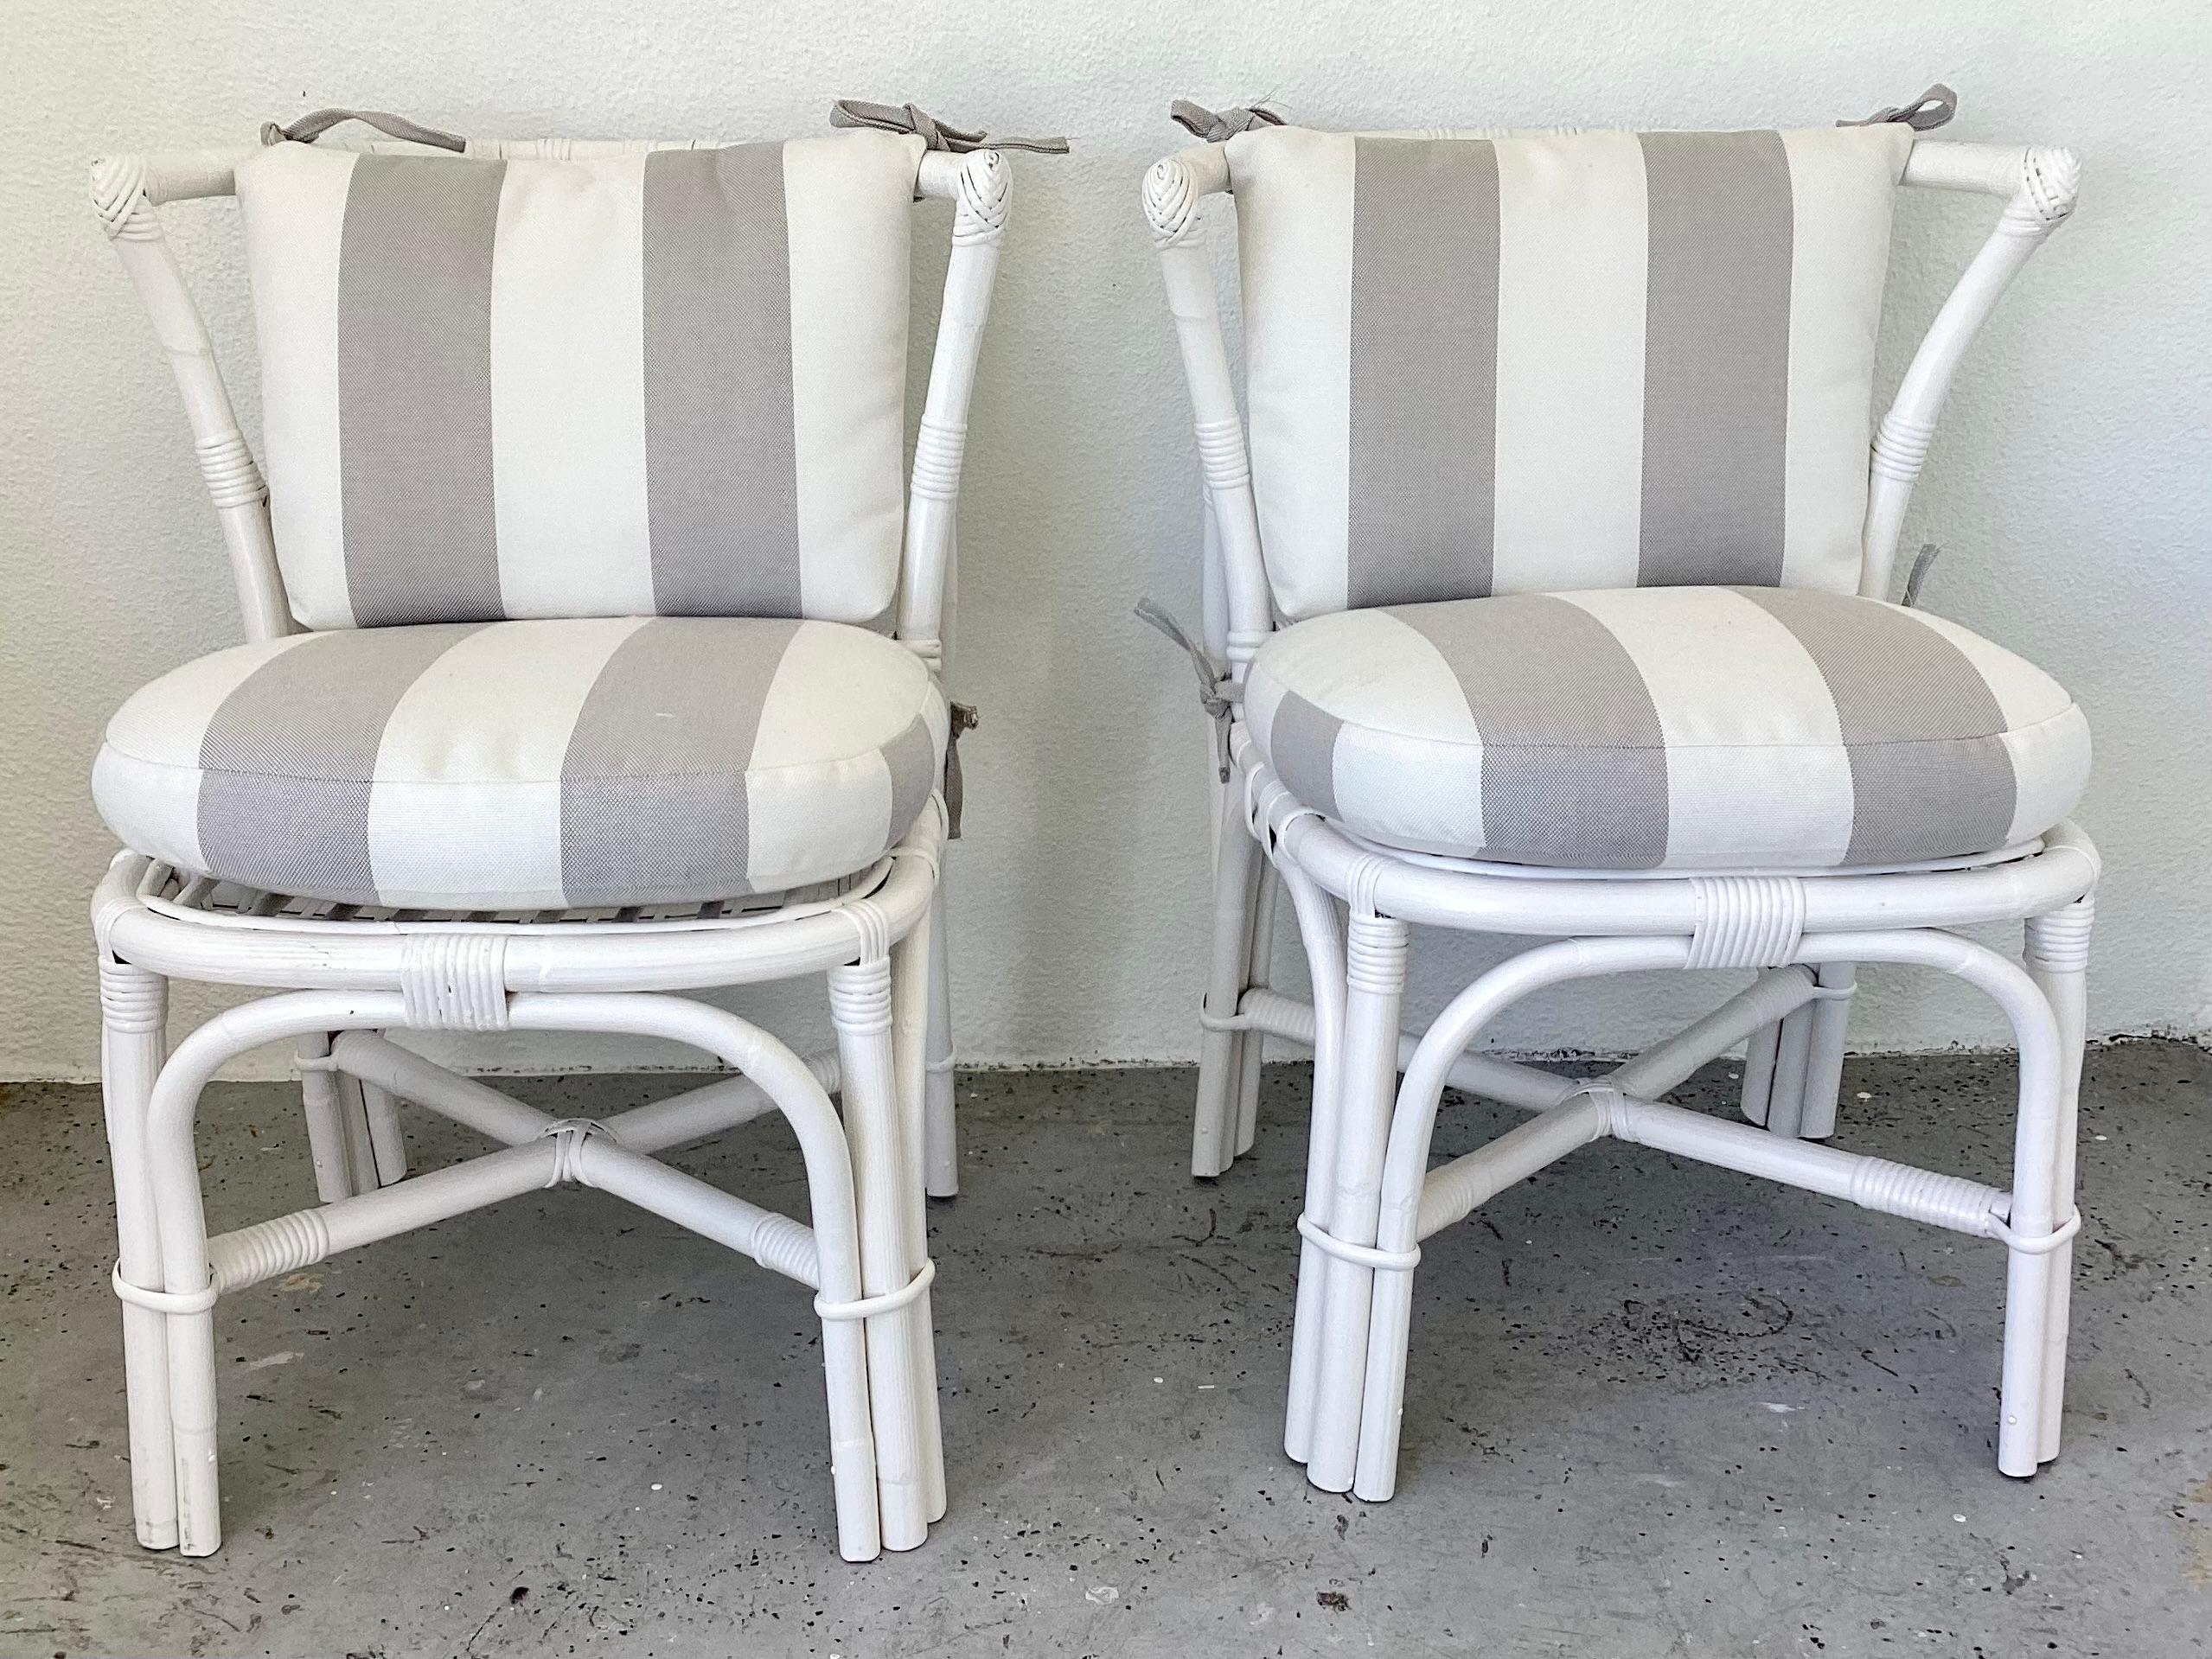 Fabulous pair of Ficks Reed boho chic rattan side chairs with curved backs, new Sunbrella cushions, freshly lacquered in white. Great addition to your boho chic interiors.